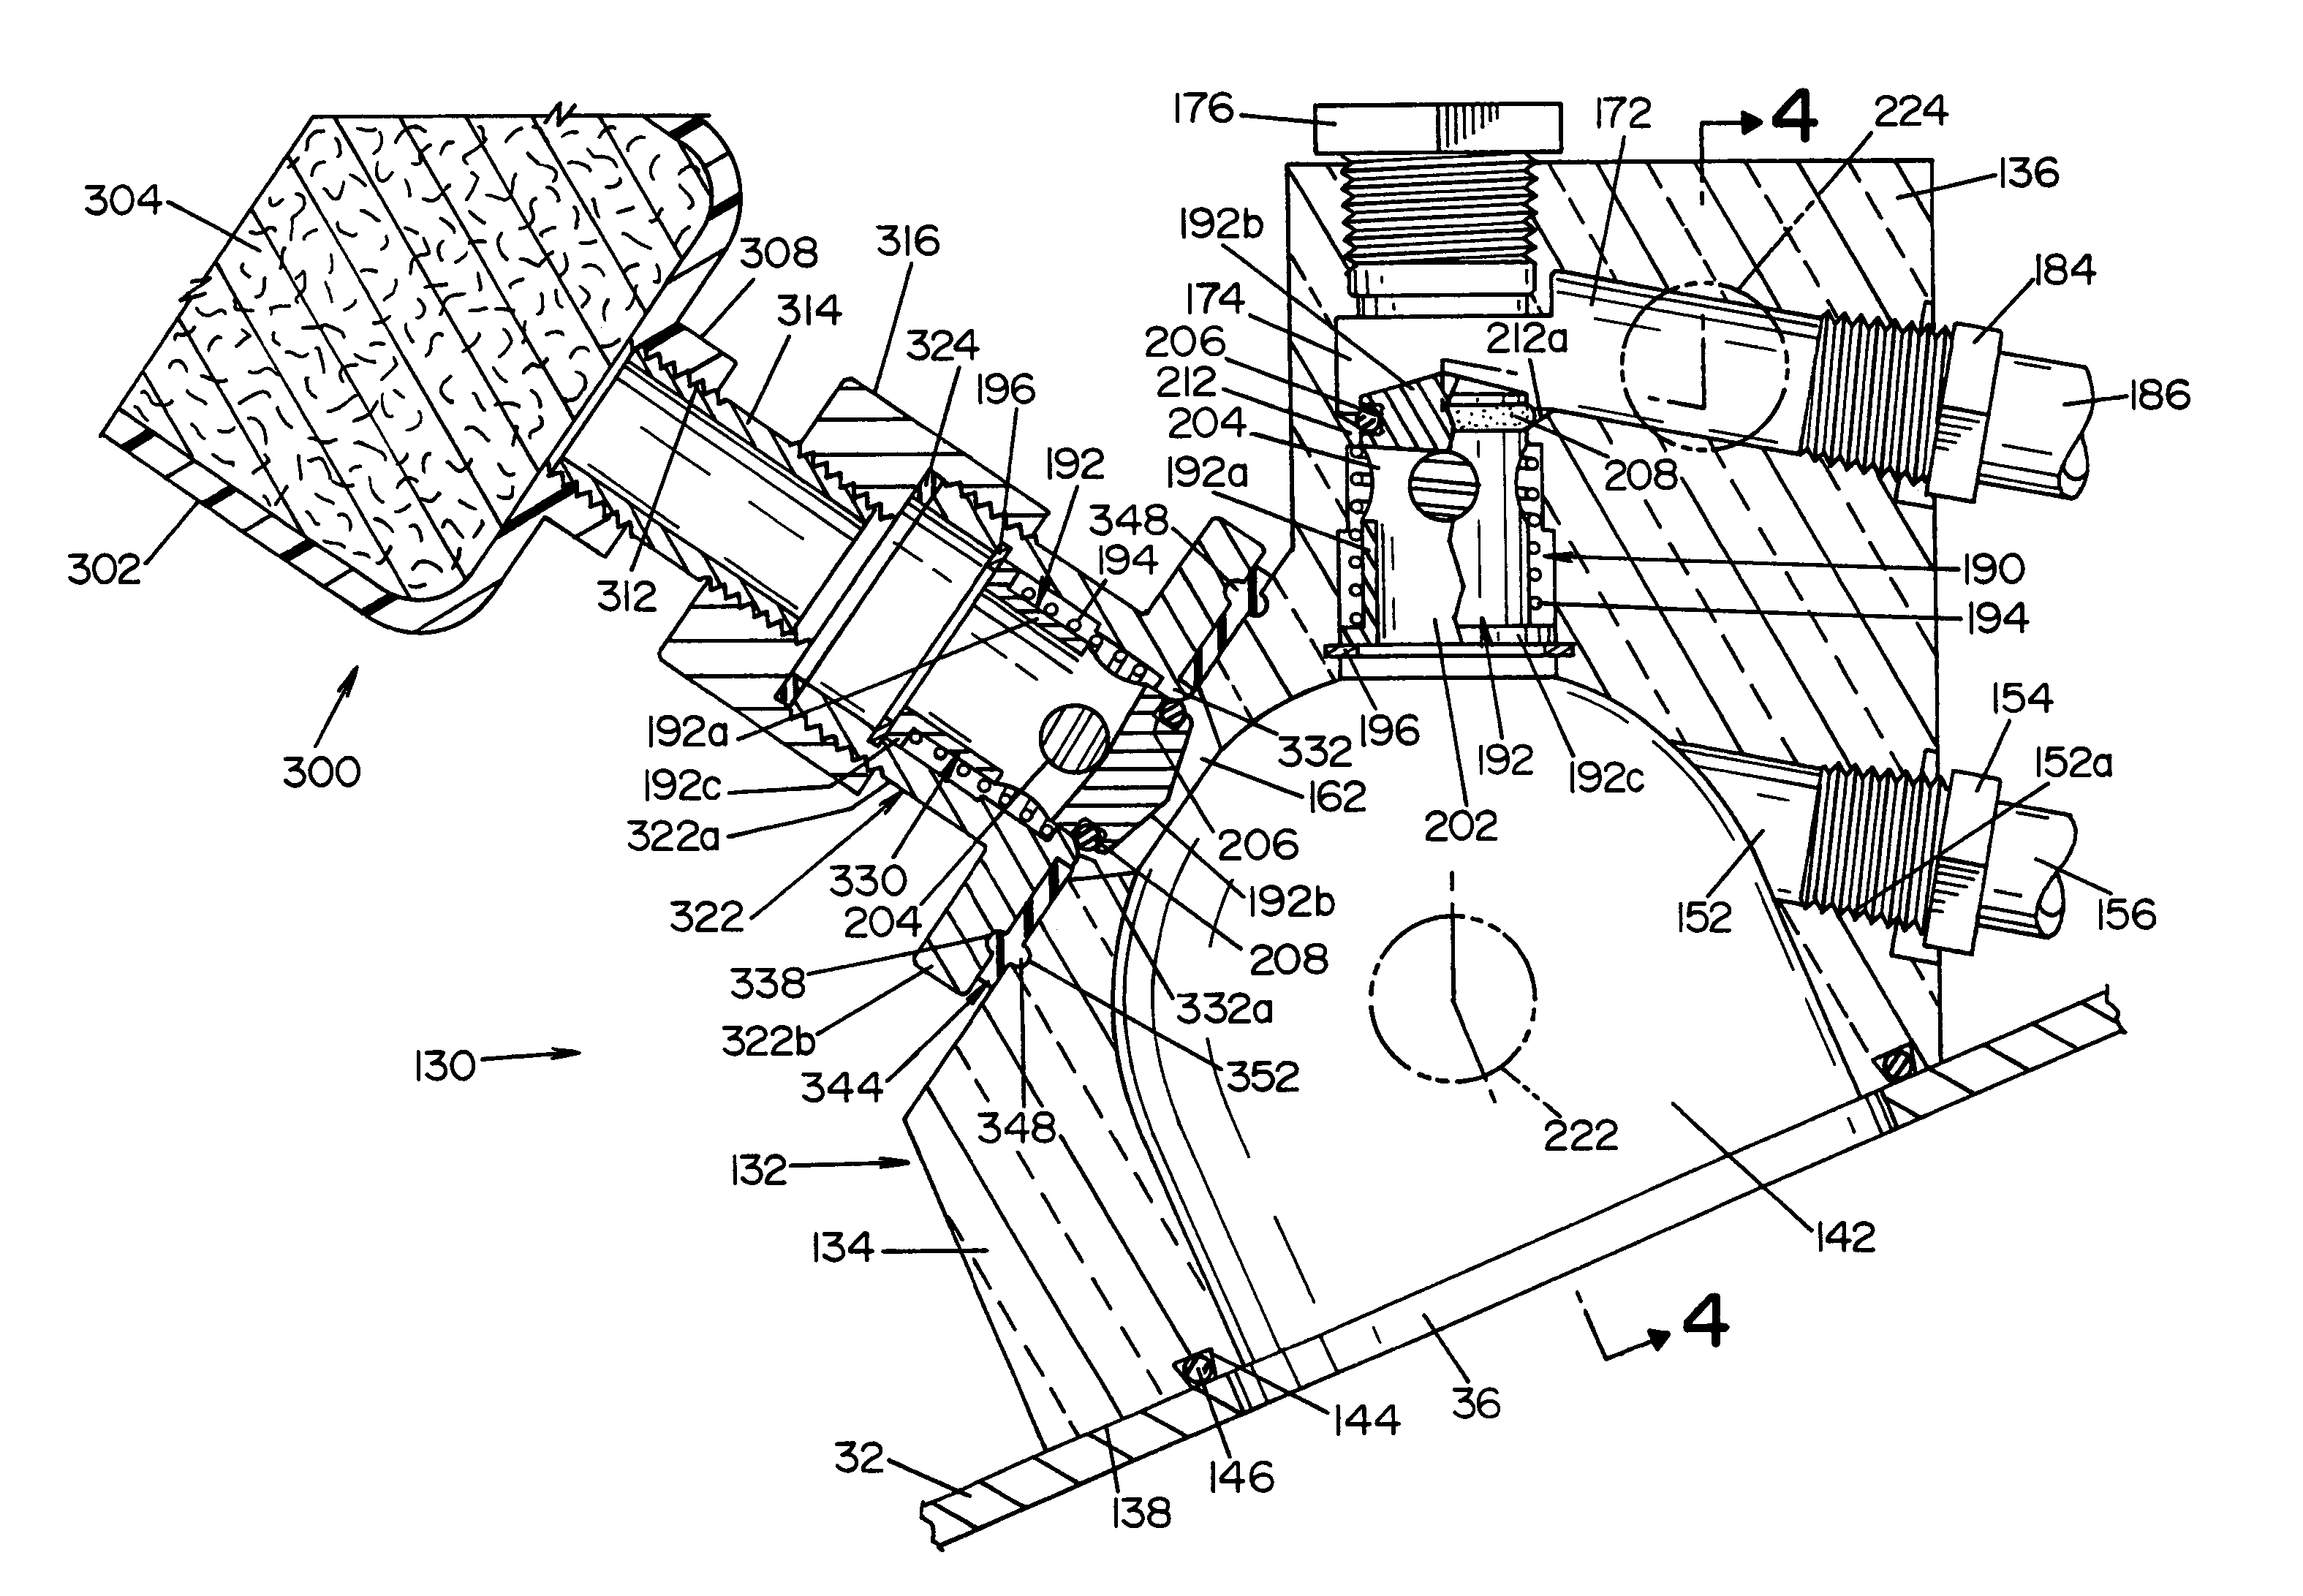 Fluid over-flow/make-up air assembly for reprocessor